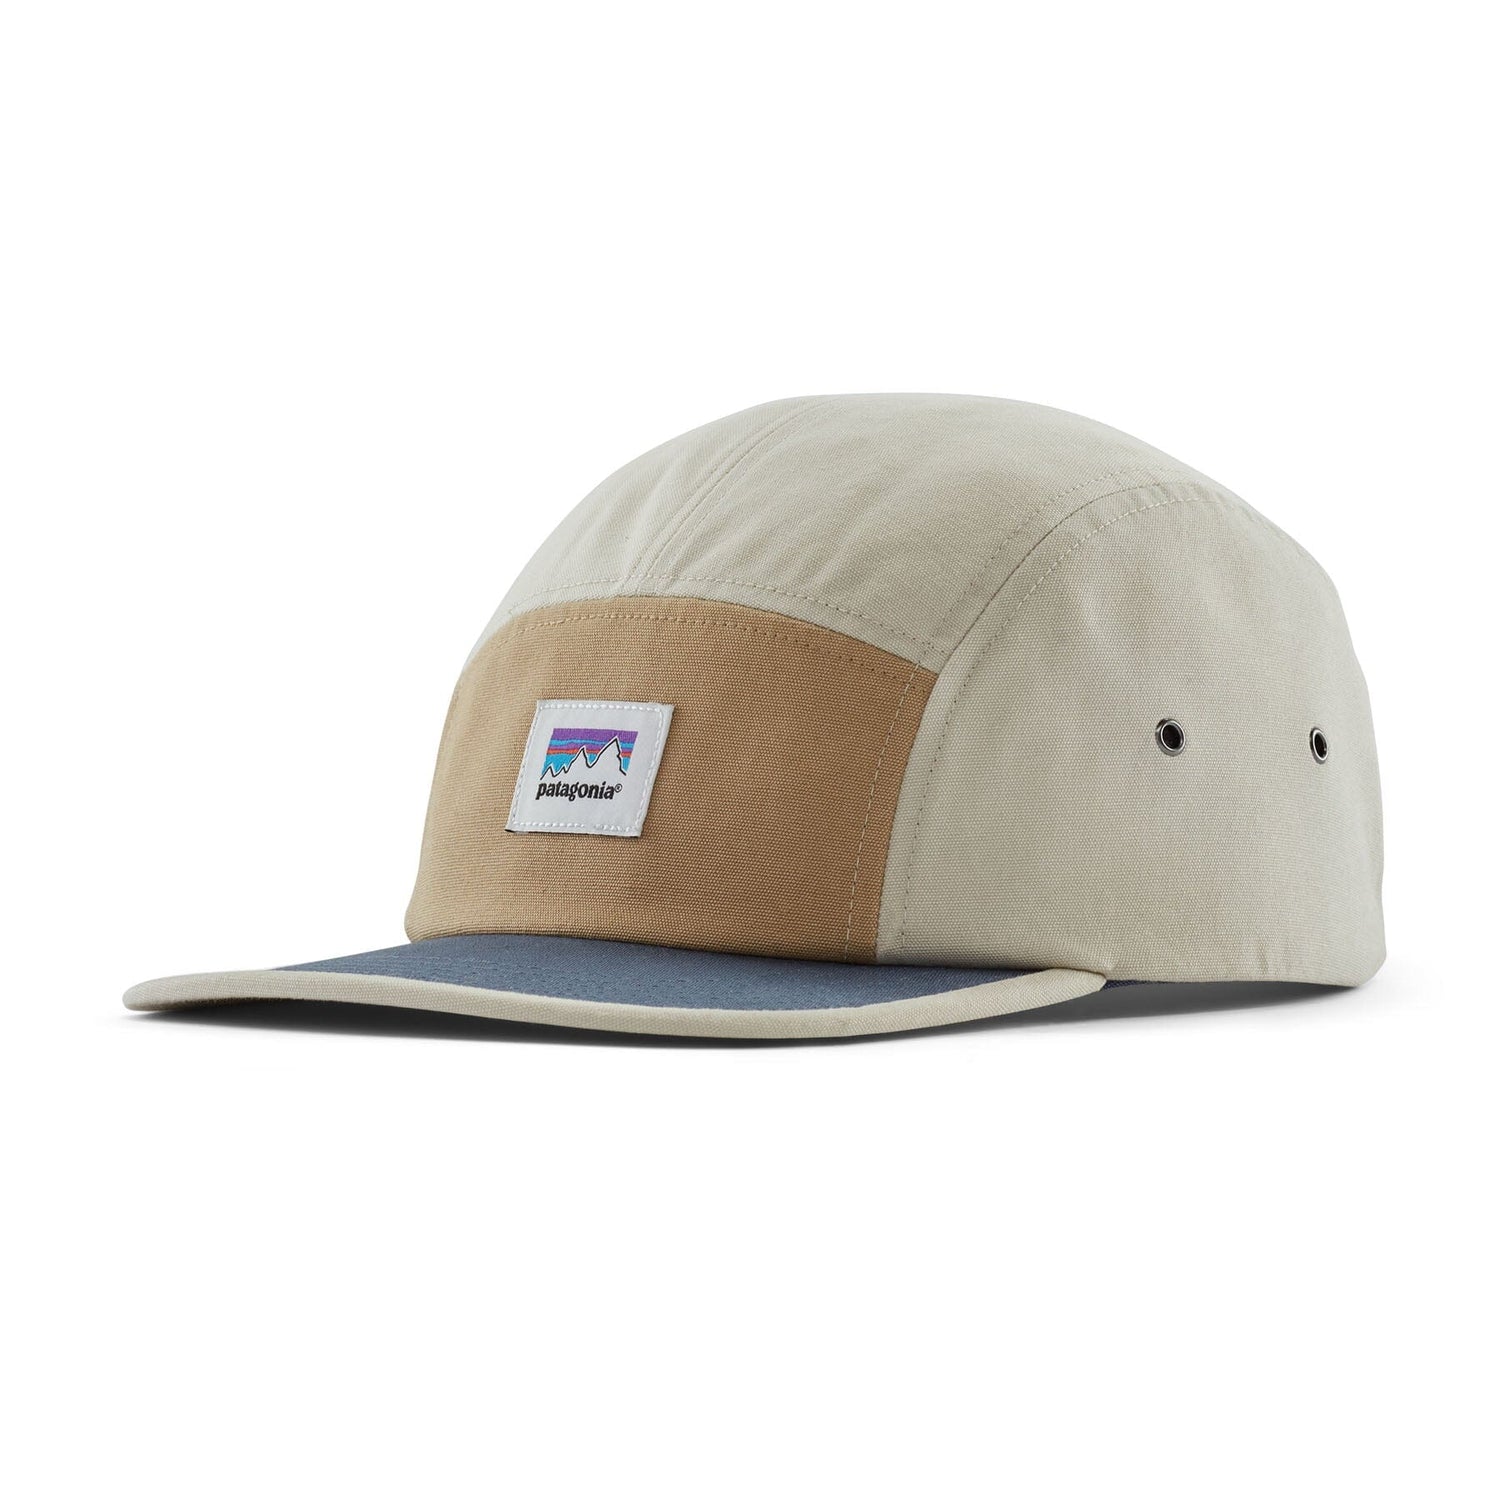 Patagonia - Graphic Maclure Hat - Organic Cotton & recycled polyester - Weekendbee - sustainable sportswear